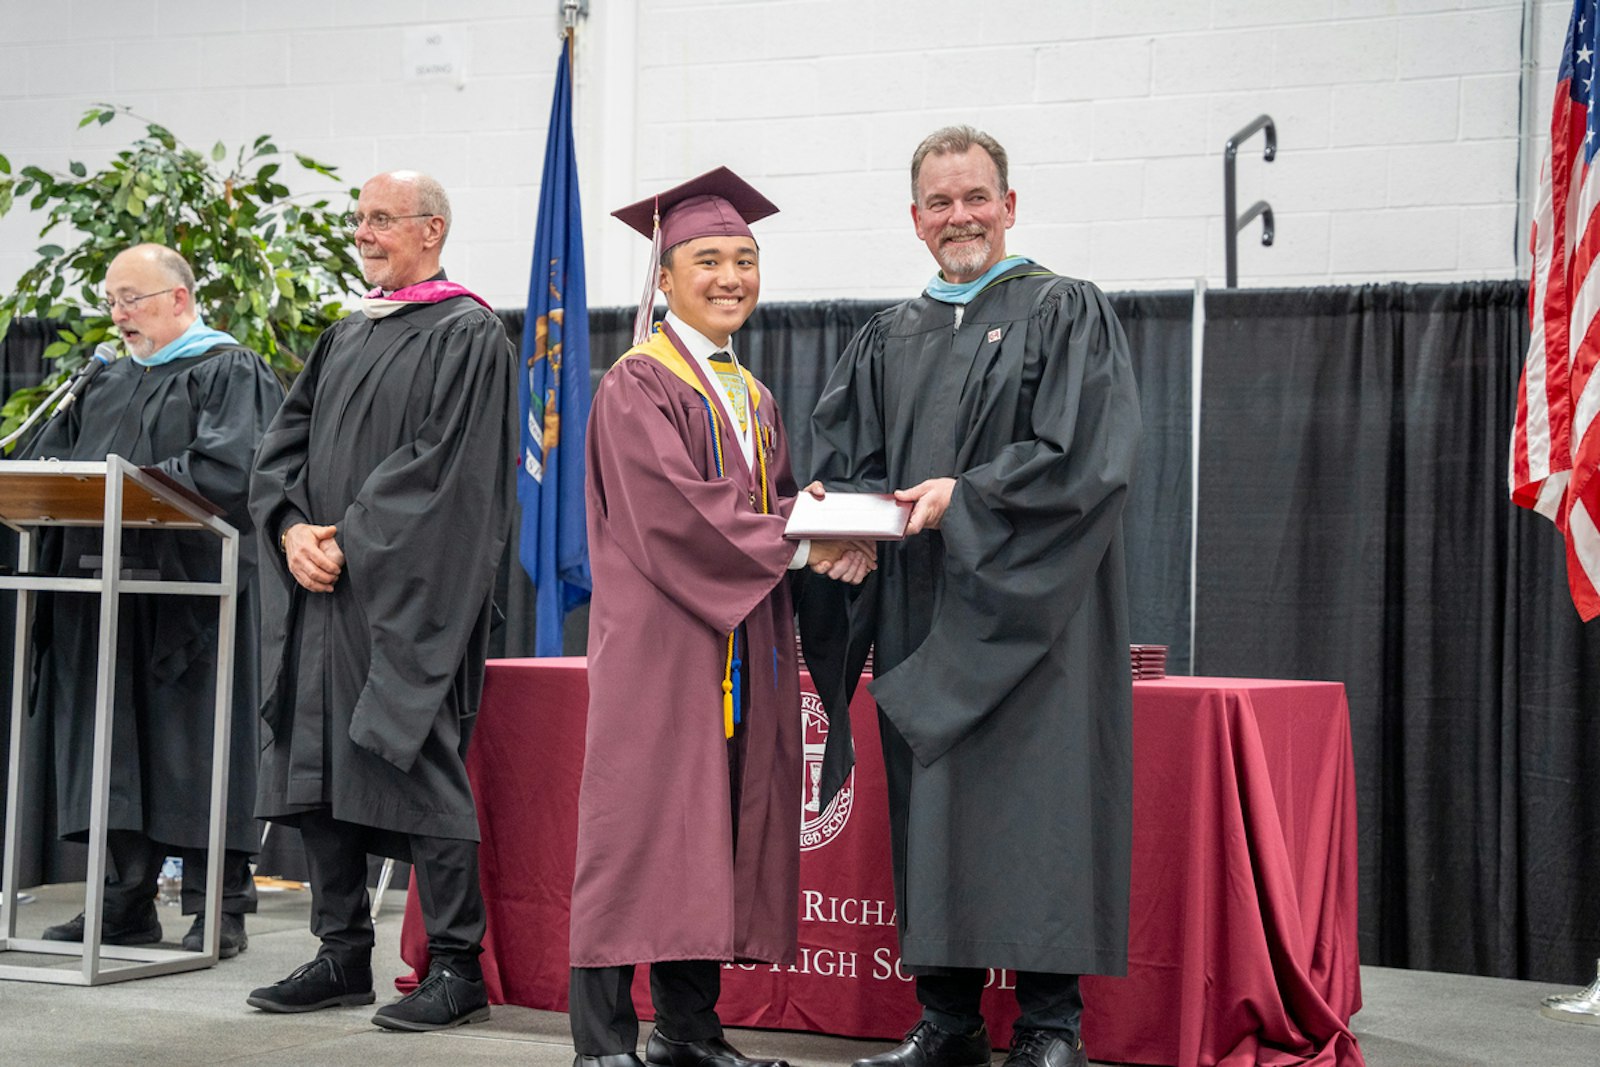 As Gabriel Richard grads received their diplomas, many told Detroit Catholic they credit their Catholic school formation with giving them positive examples of faith, community and role models.